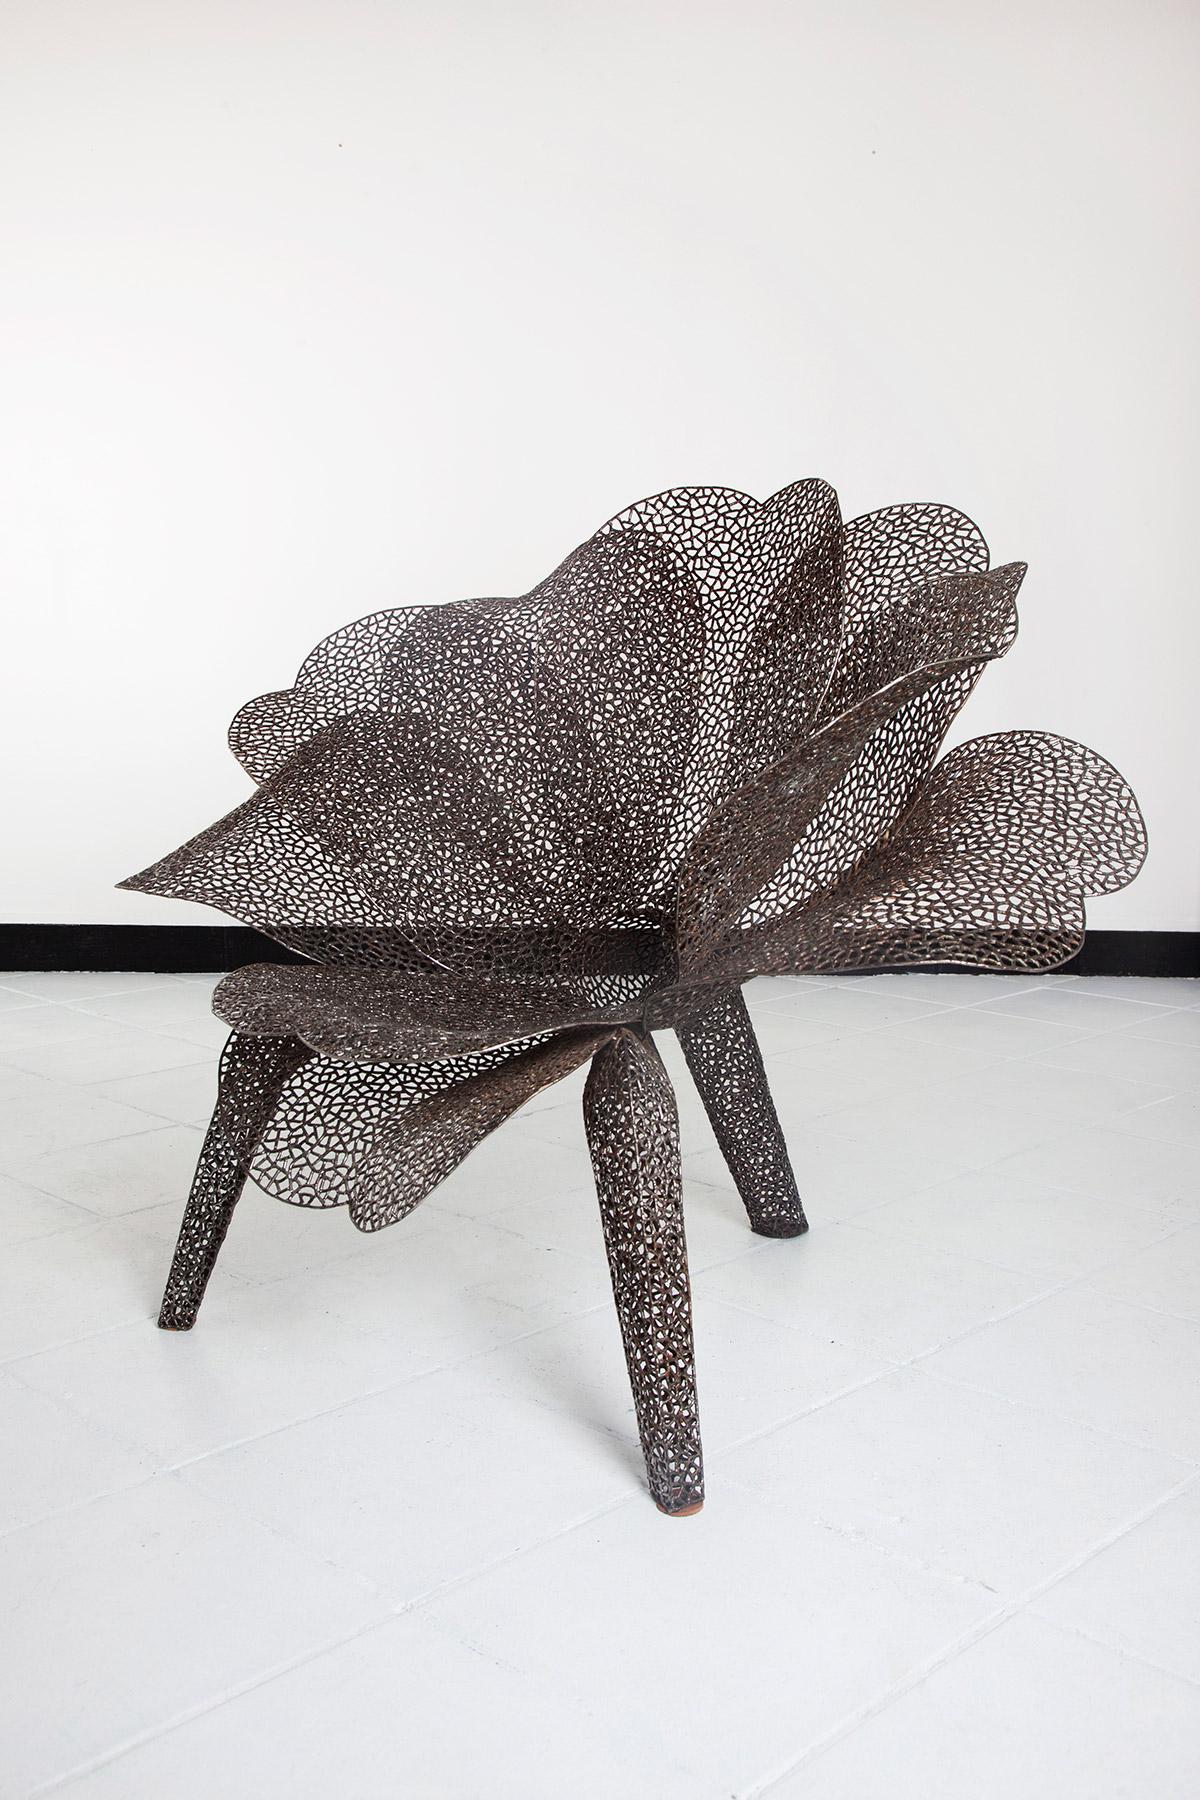 Flower armchair 
Work from the 1980s
Metal
Measures: H: 90 cm, W: 115 cm, D: 72 cm.